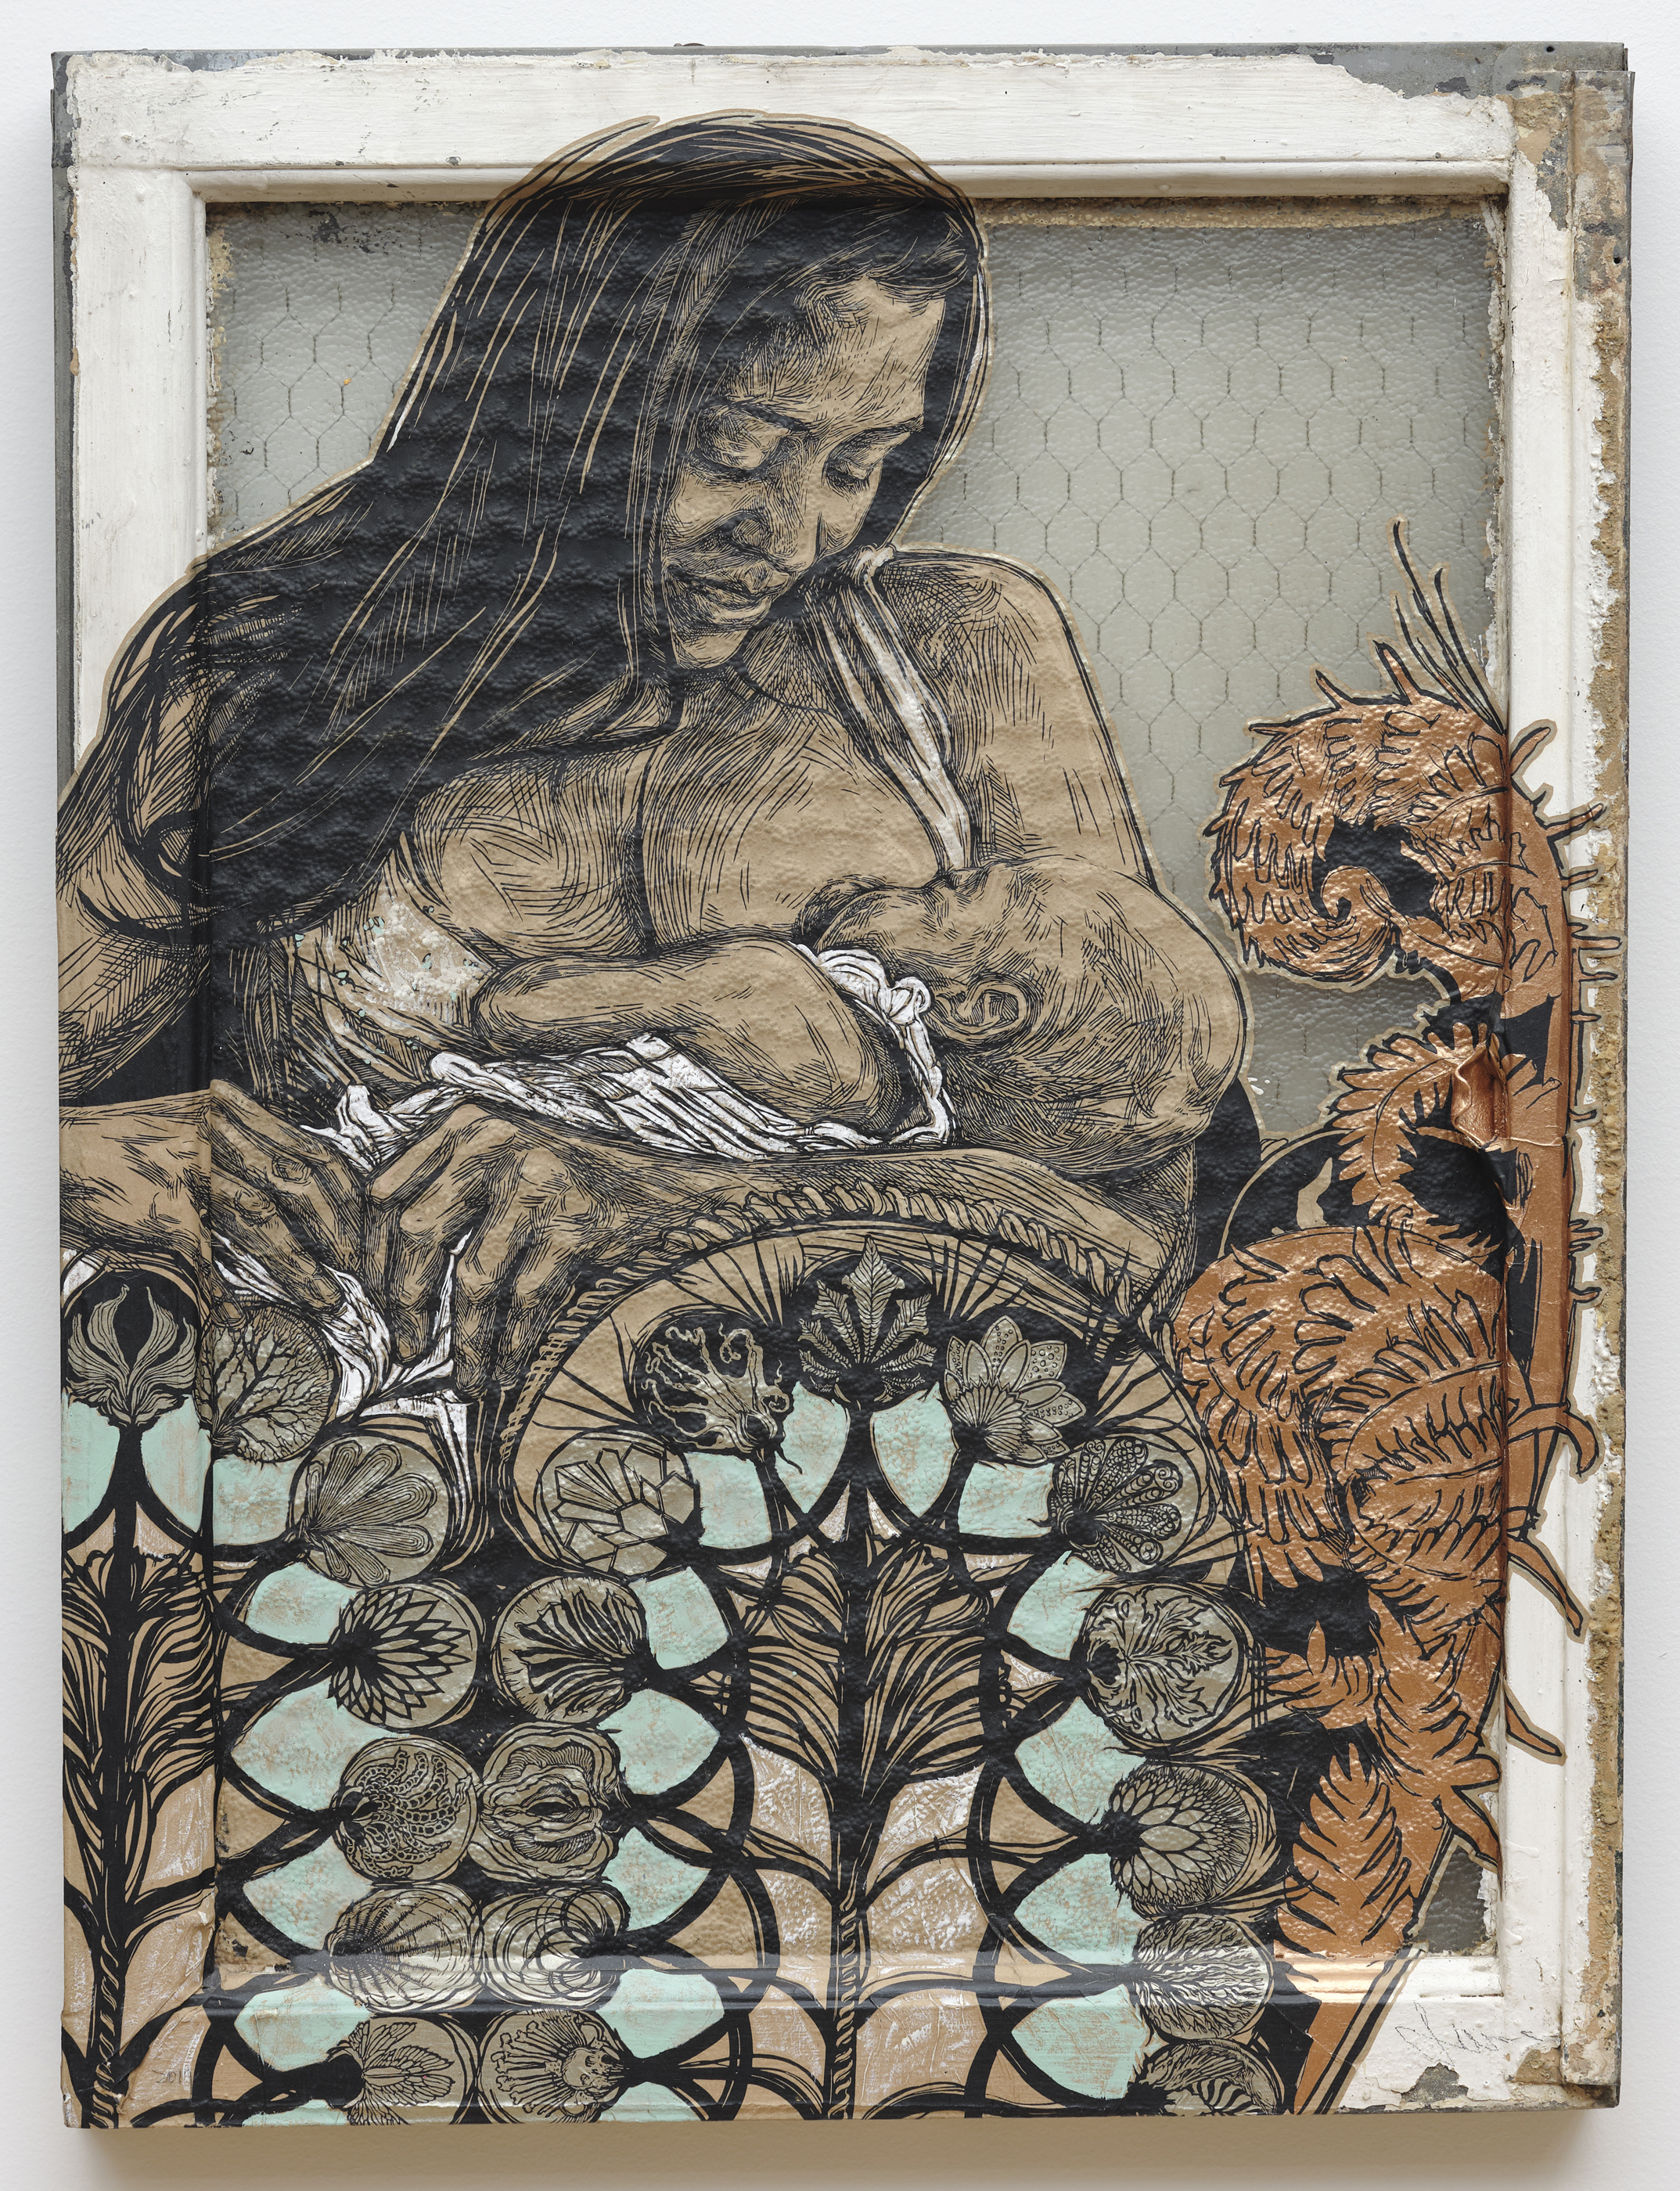 A large block print of a dark-skinned woman with long dark hair holding a baby up to her breast and nursing. The bottom of the image is organic, abstract patterns. The whole piece is done atop a window frame with wires on it.